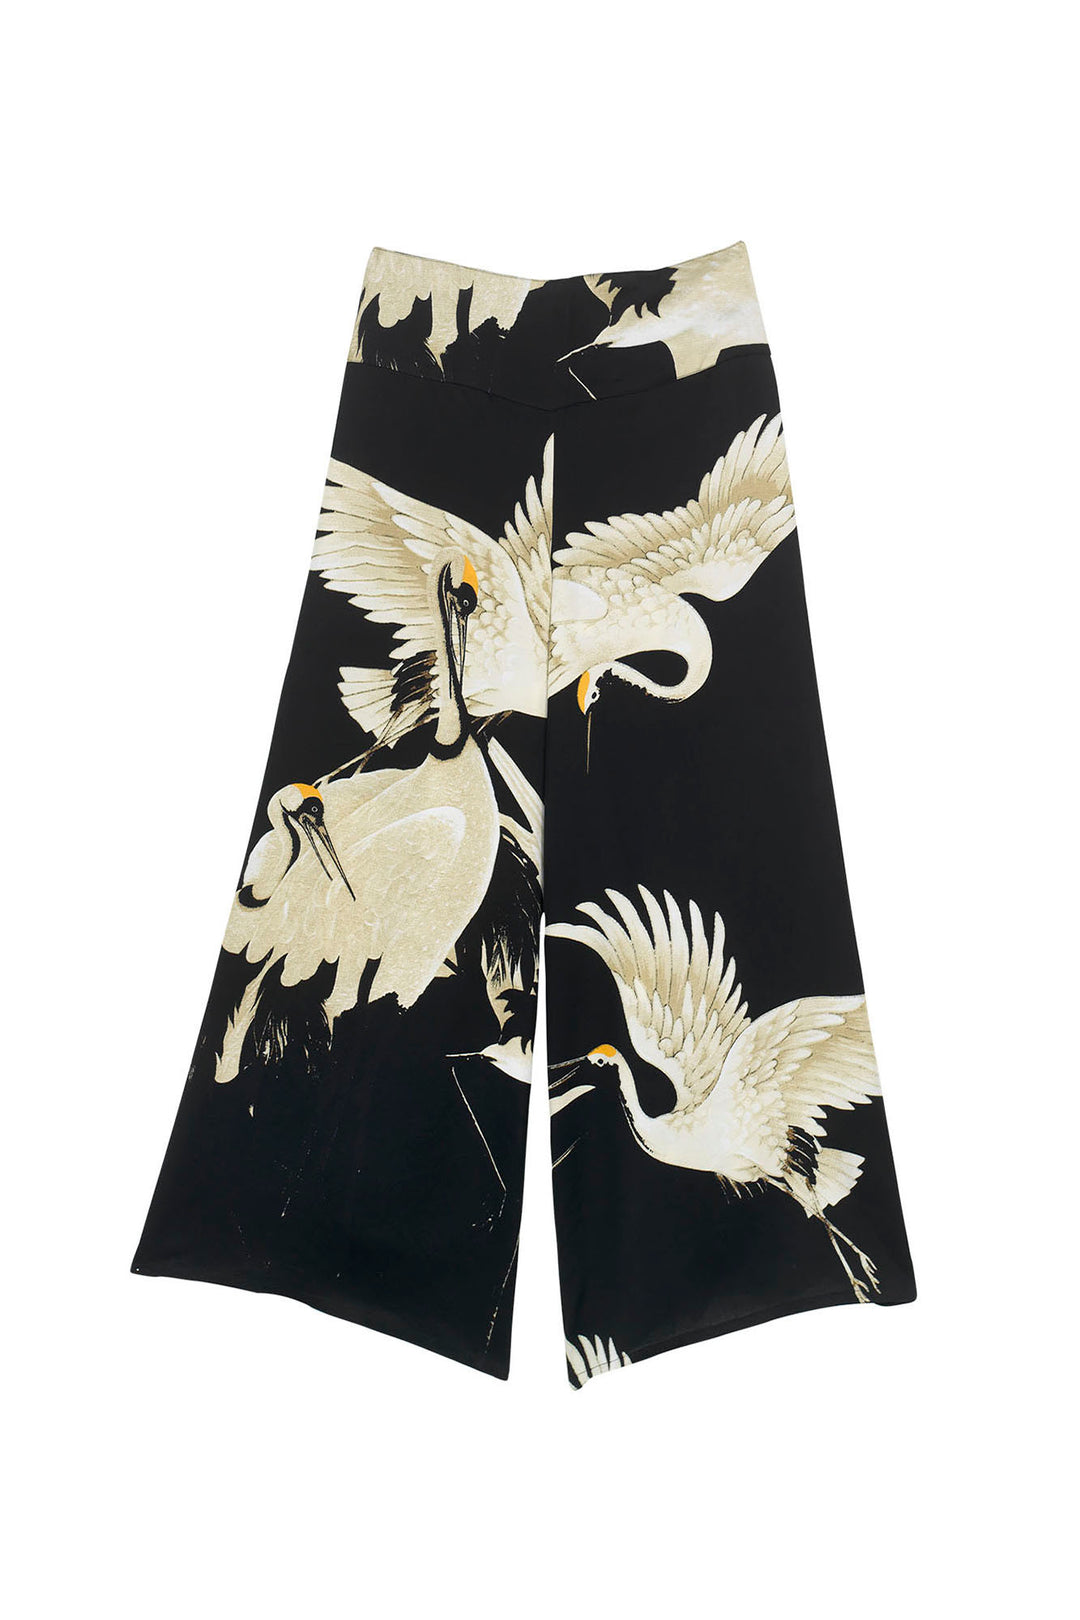 Ladies palazzo satin pants black background with stork bird print by One Hundred Stars